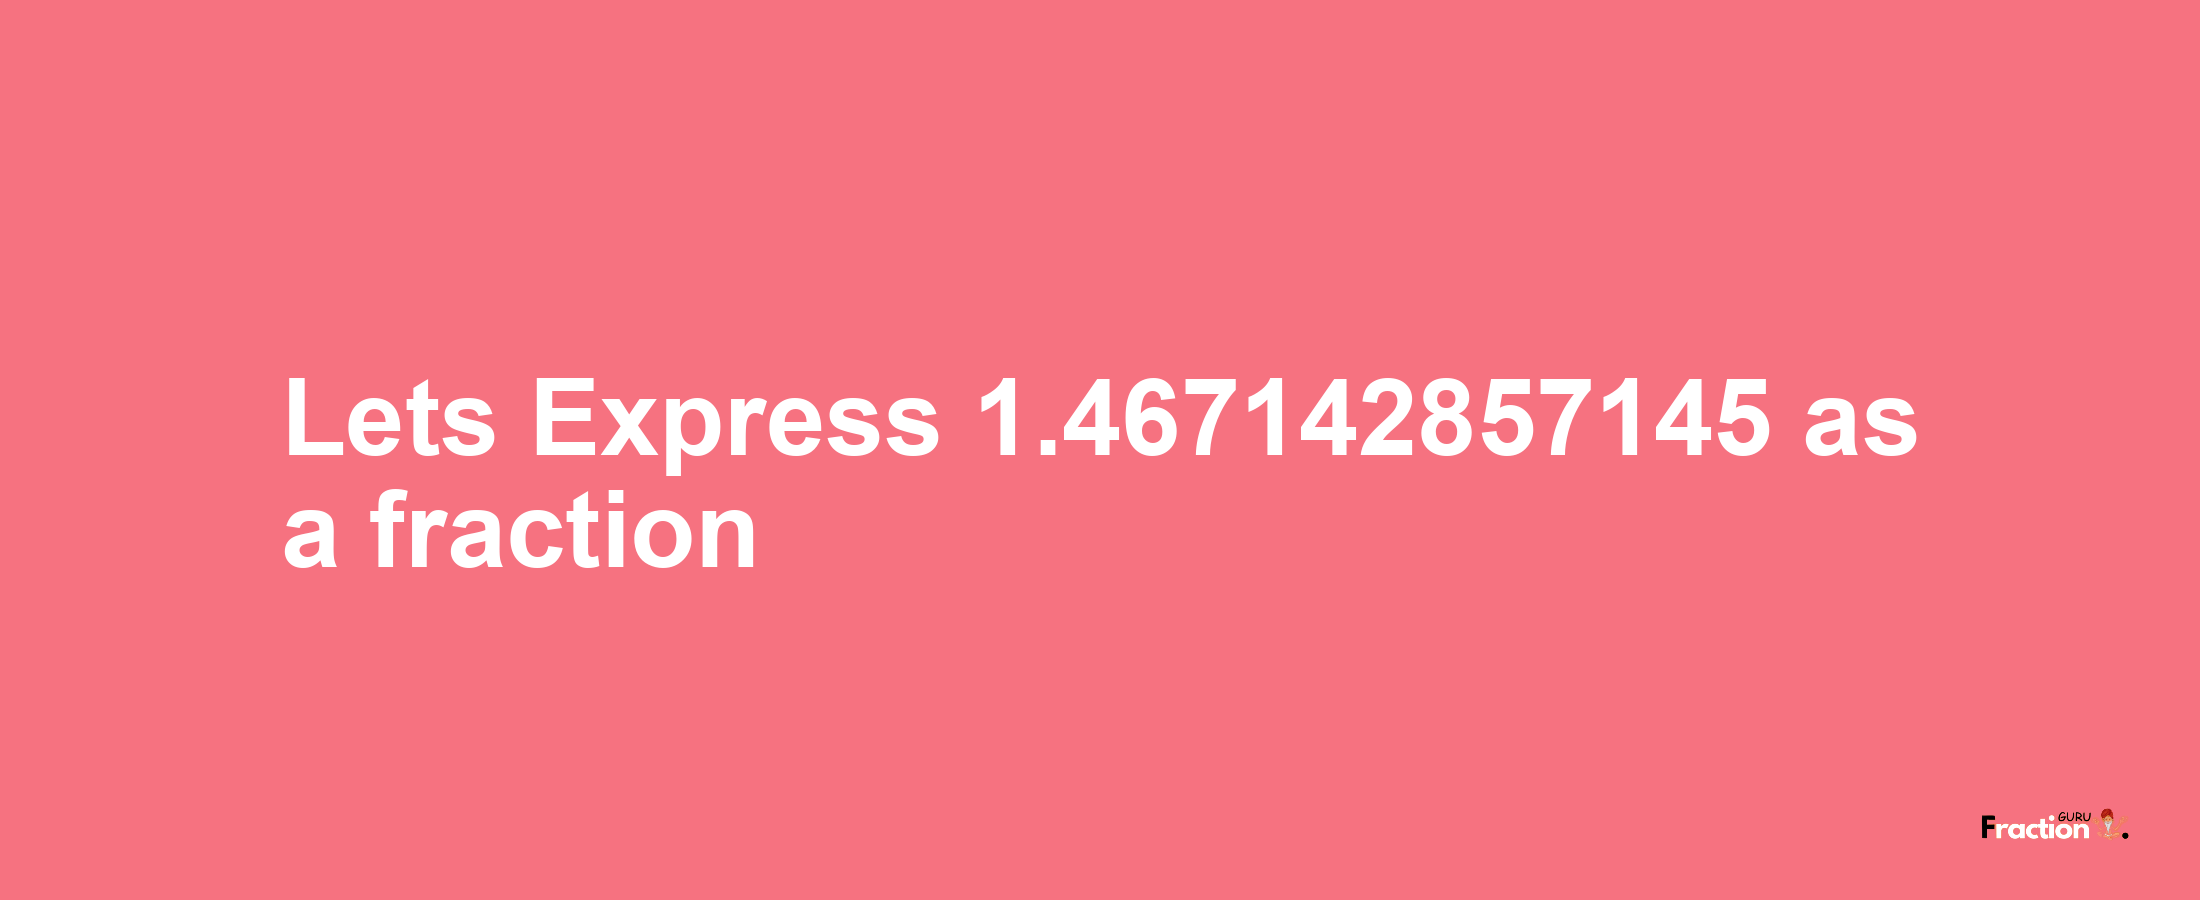 Lets Express 1.467142857145 as afraction